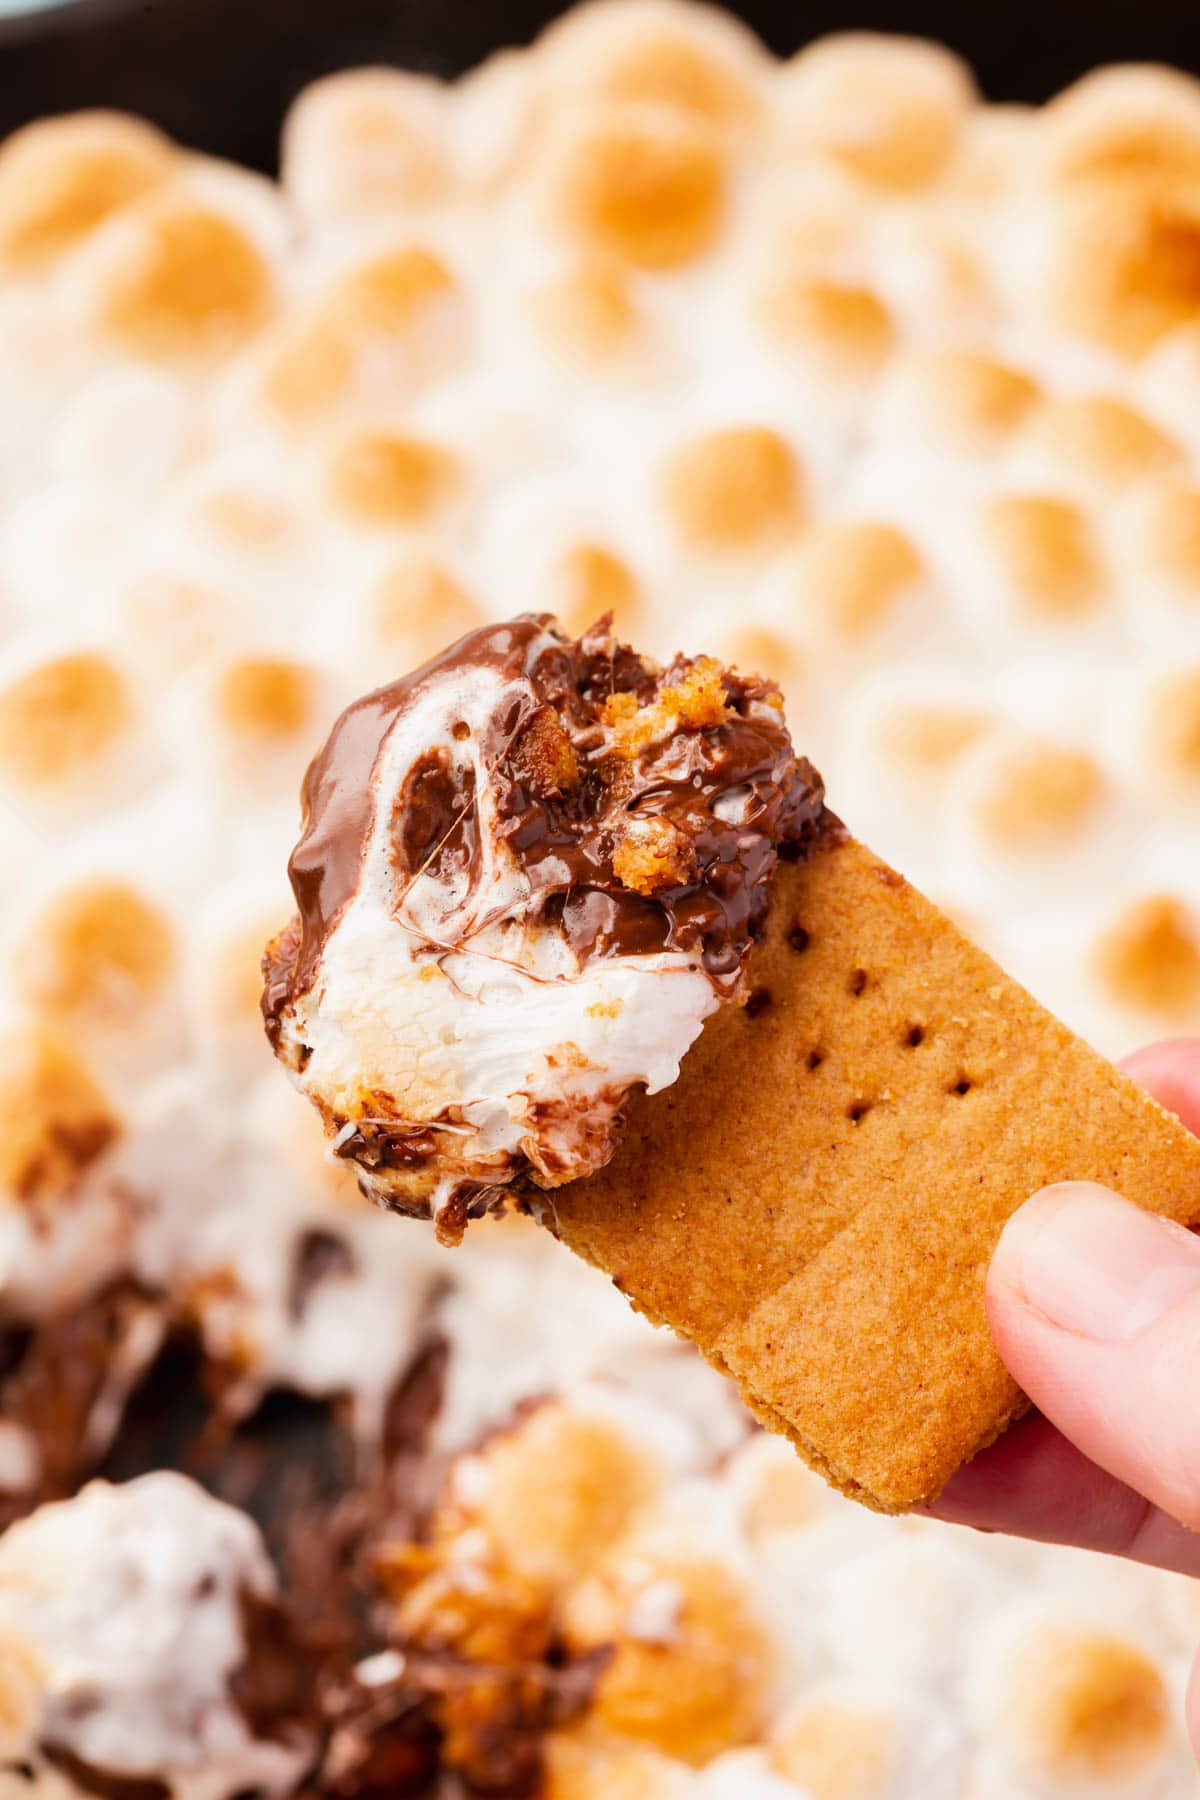 A hand holding a graham cracker dipped in s'mores dip over the s'mores dip with toasted marshmallows.